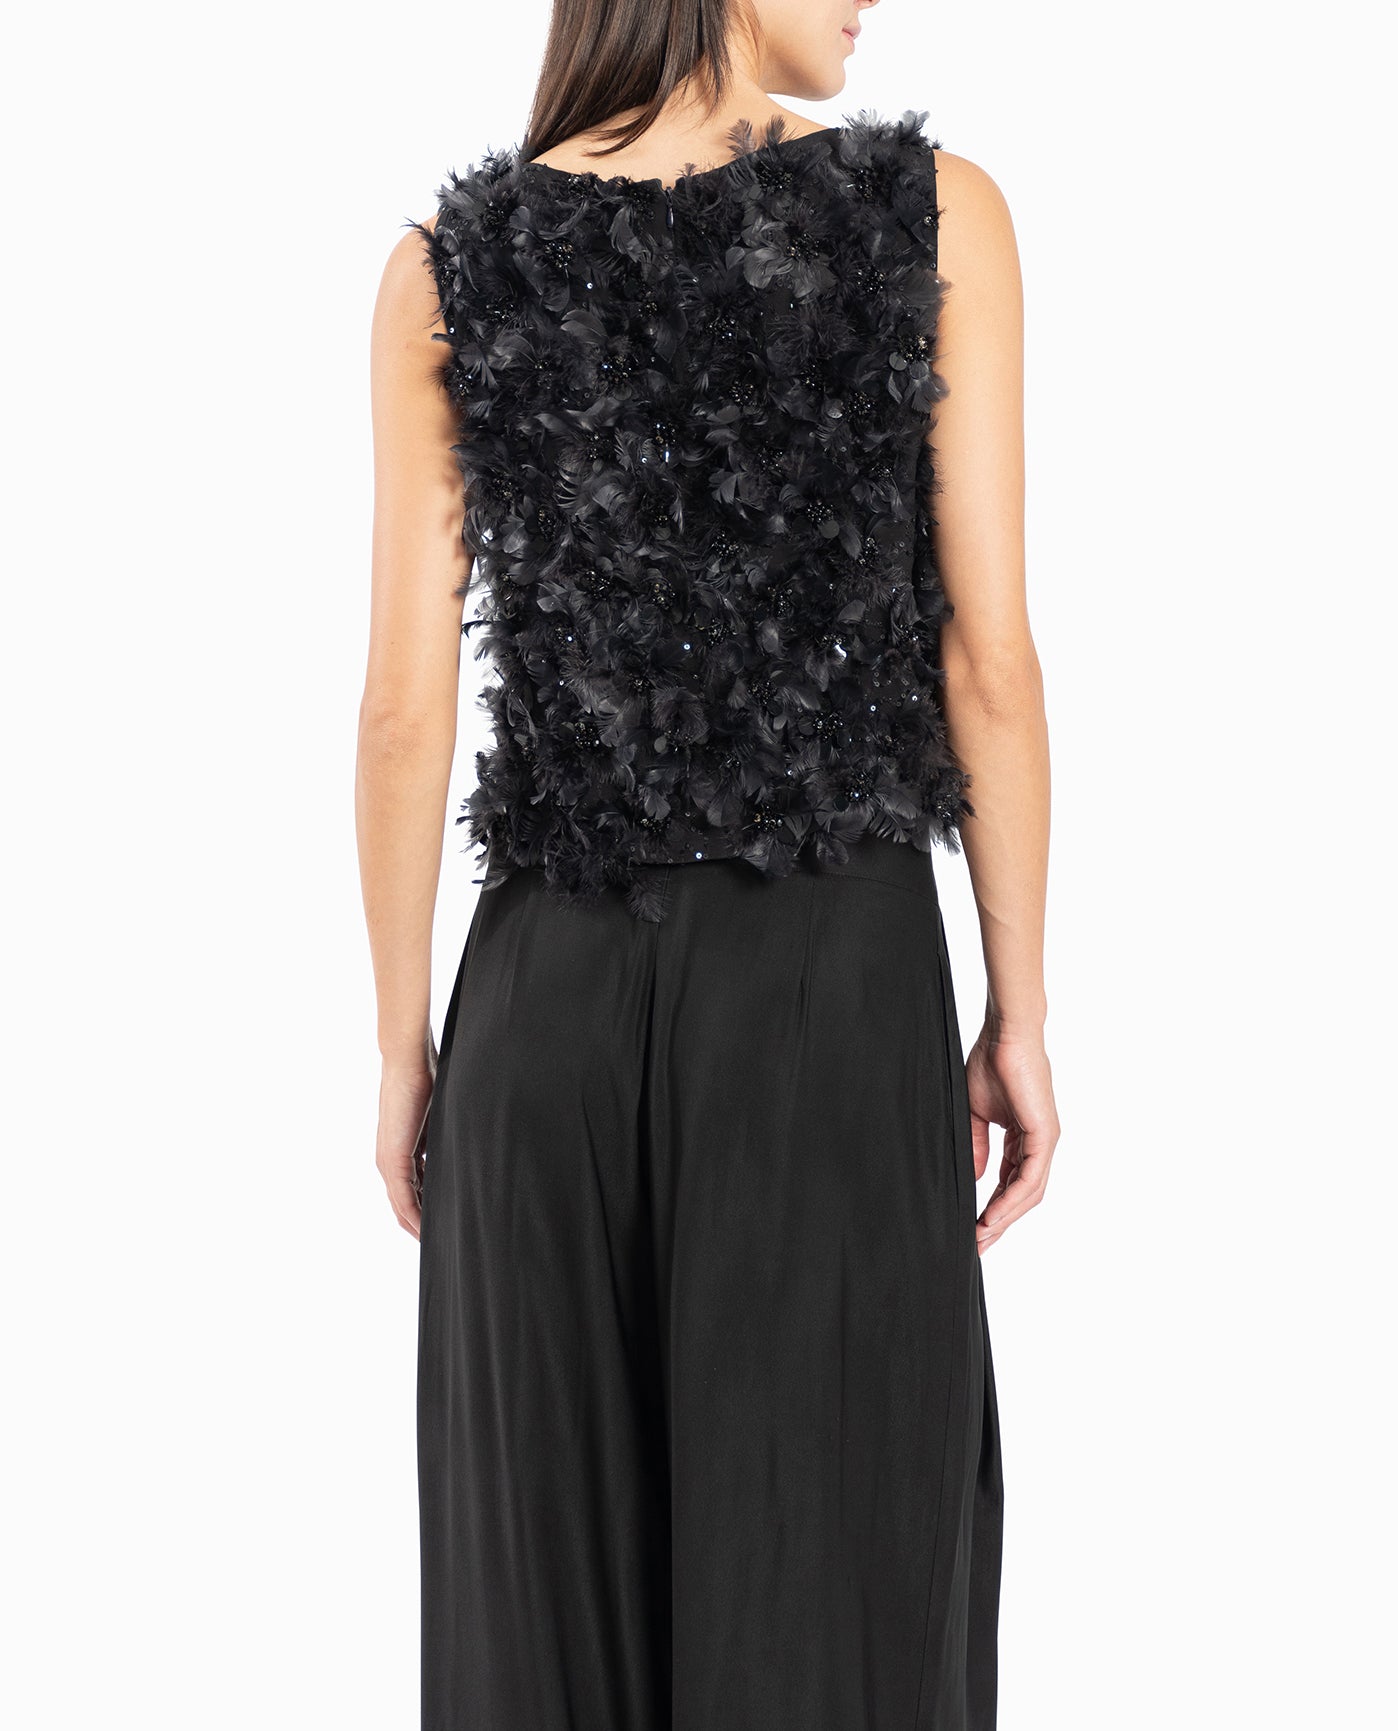 BACK OF FEATHERED FLORAL SLEVELESS TOP | Black Feather